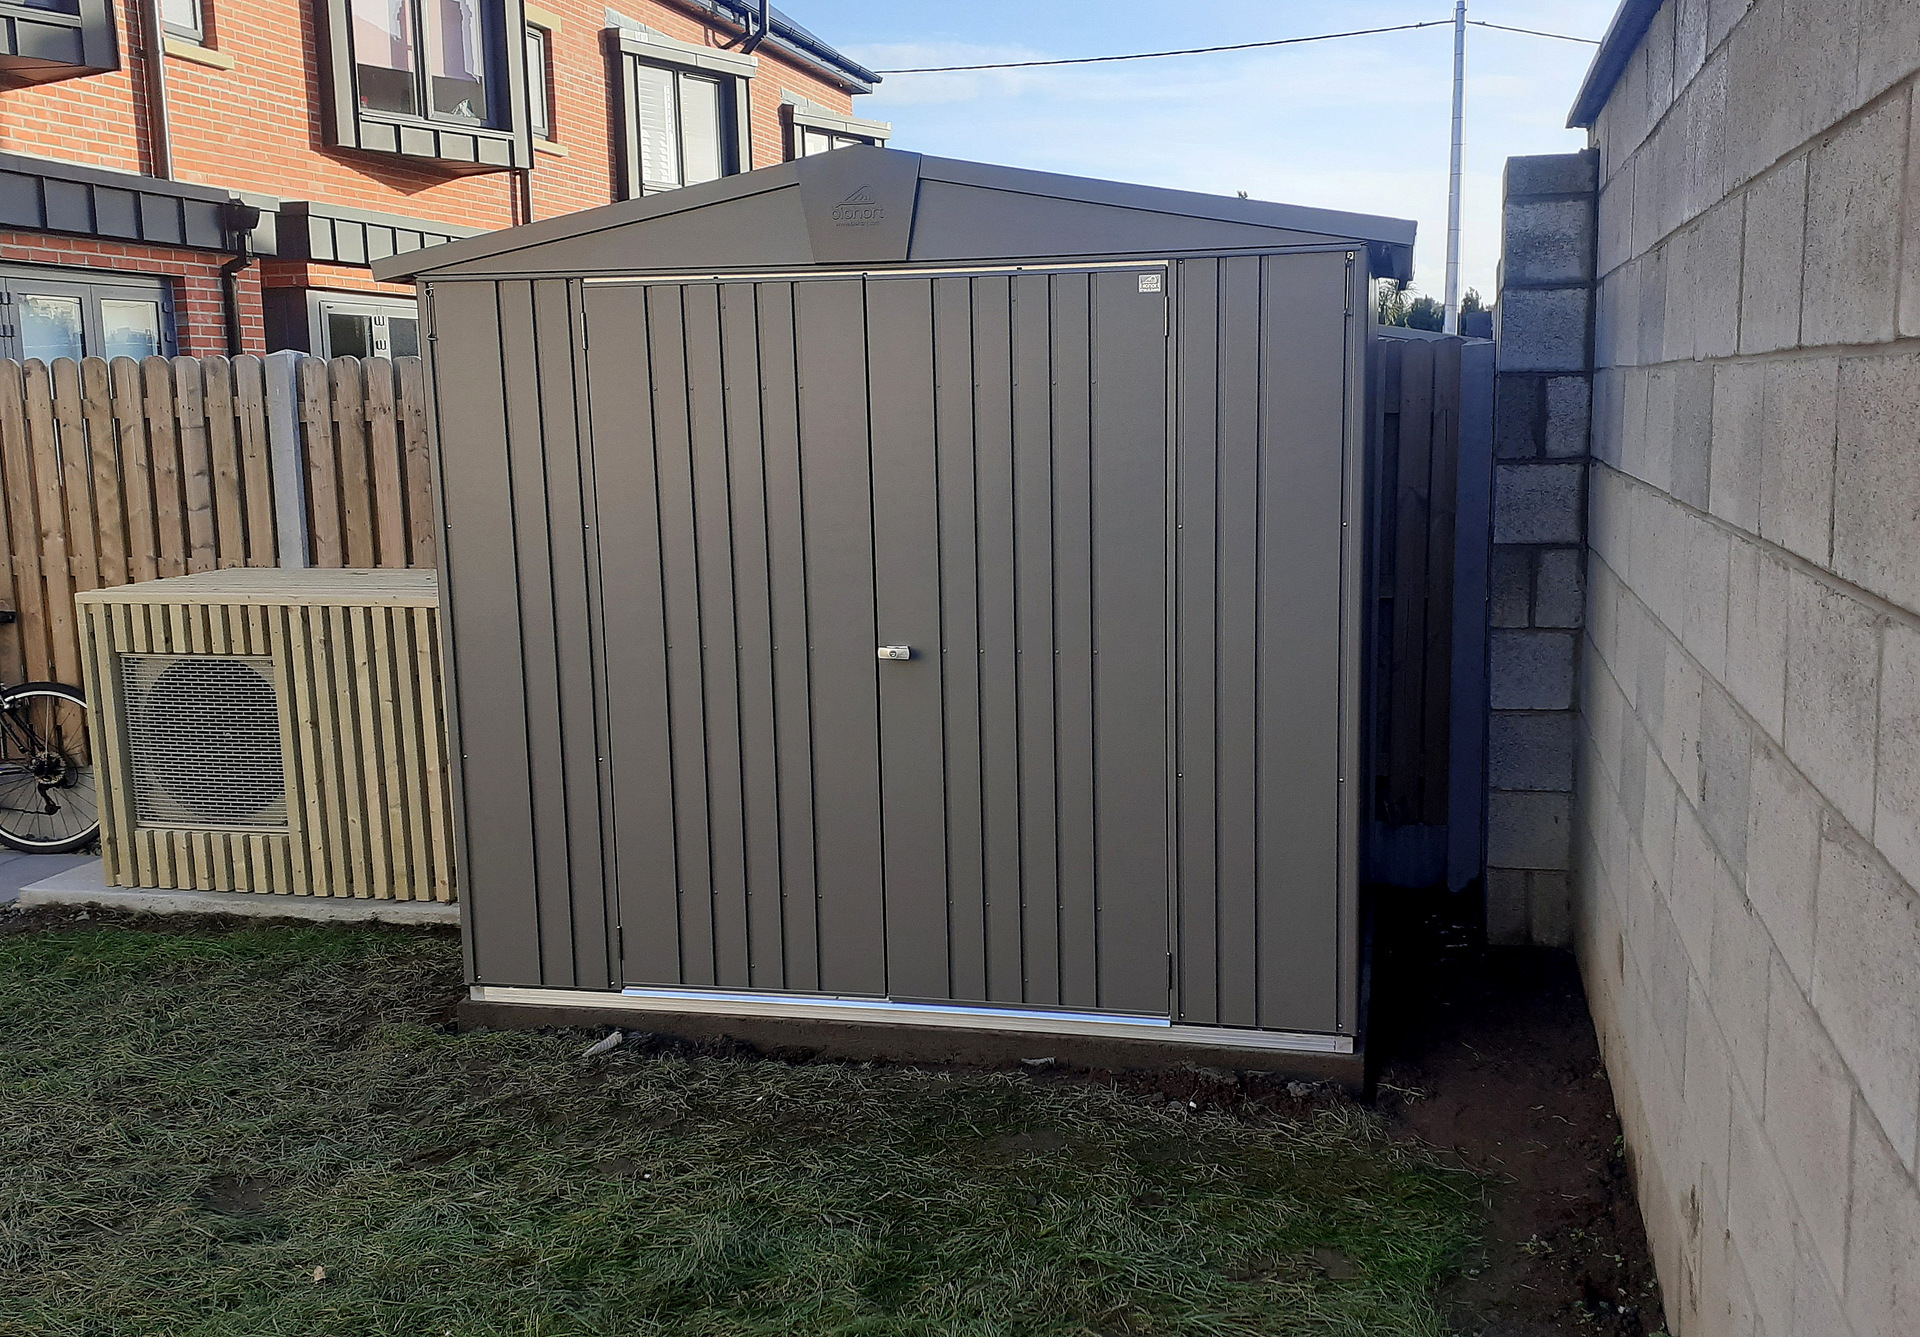 Biohort Europa Size 3, a low cost quality steel garden shed with FREE 20 year no rust warranty, in metallic quartz grey, supplied + fitted in Templeogue, Dublin 6W by Owen Chubb Landscapers